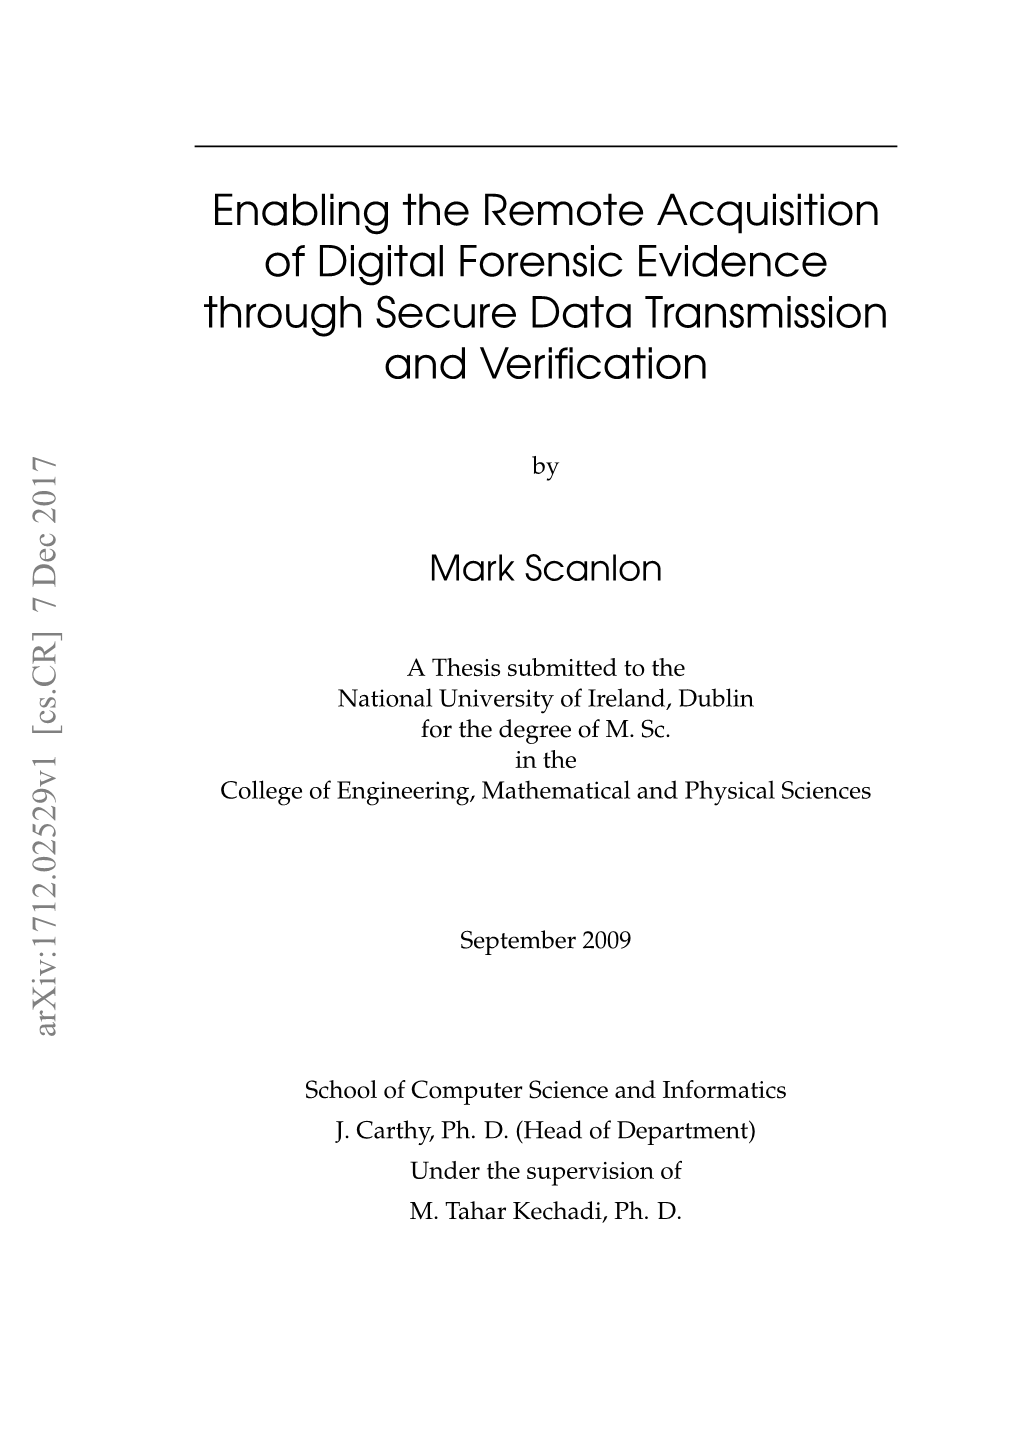 Enabling the Remote Acquisition of Digital Forensic Evidence Through Secure Data Transmission and Veriﬁcation